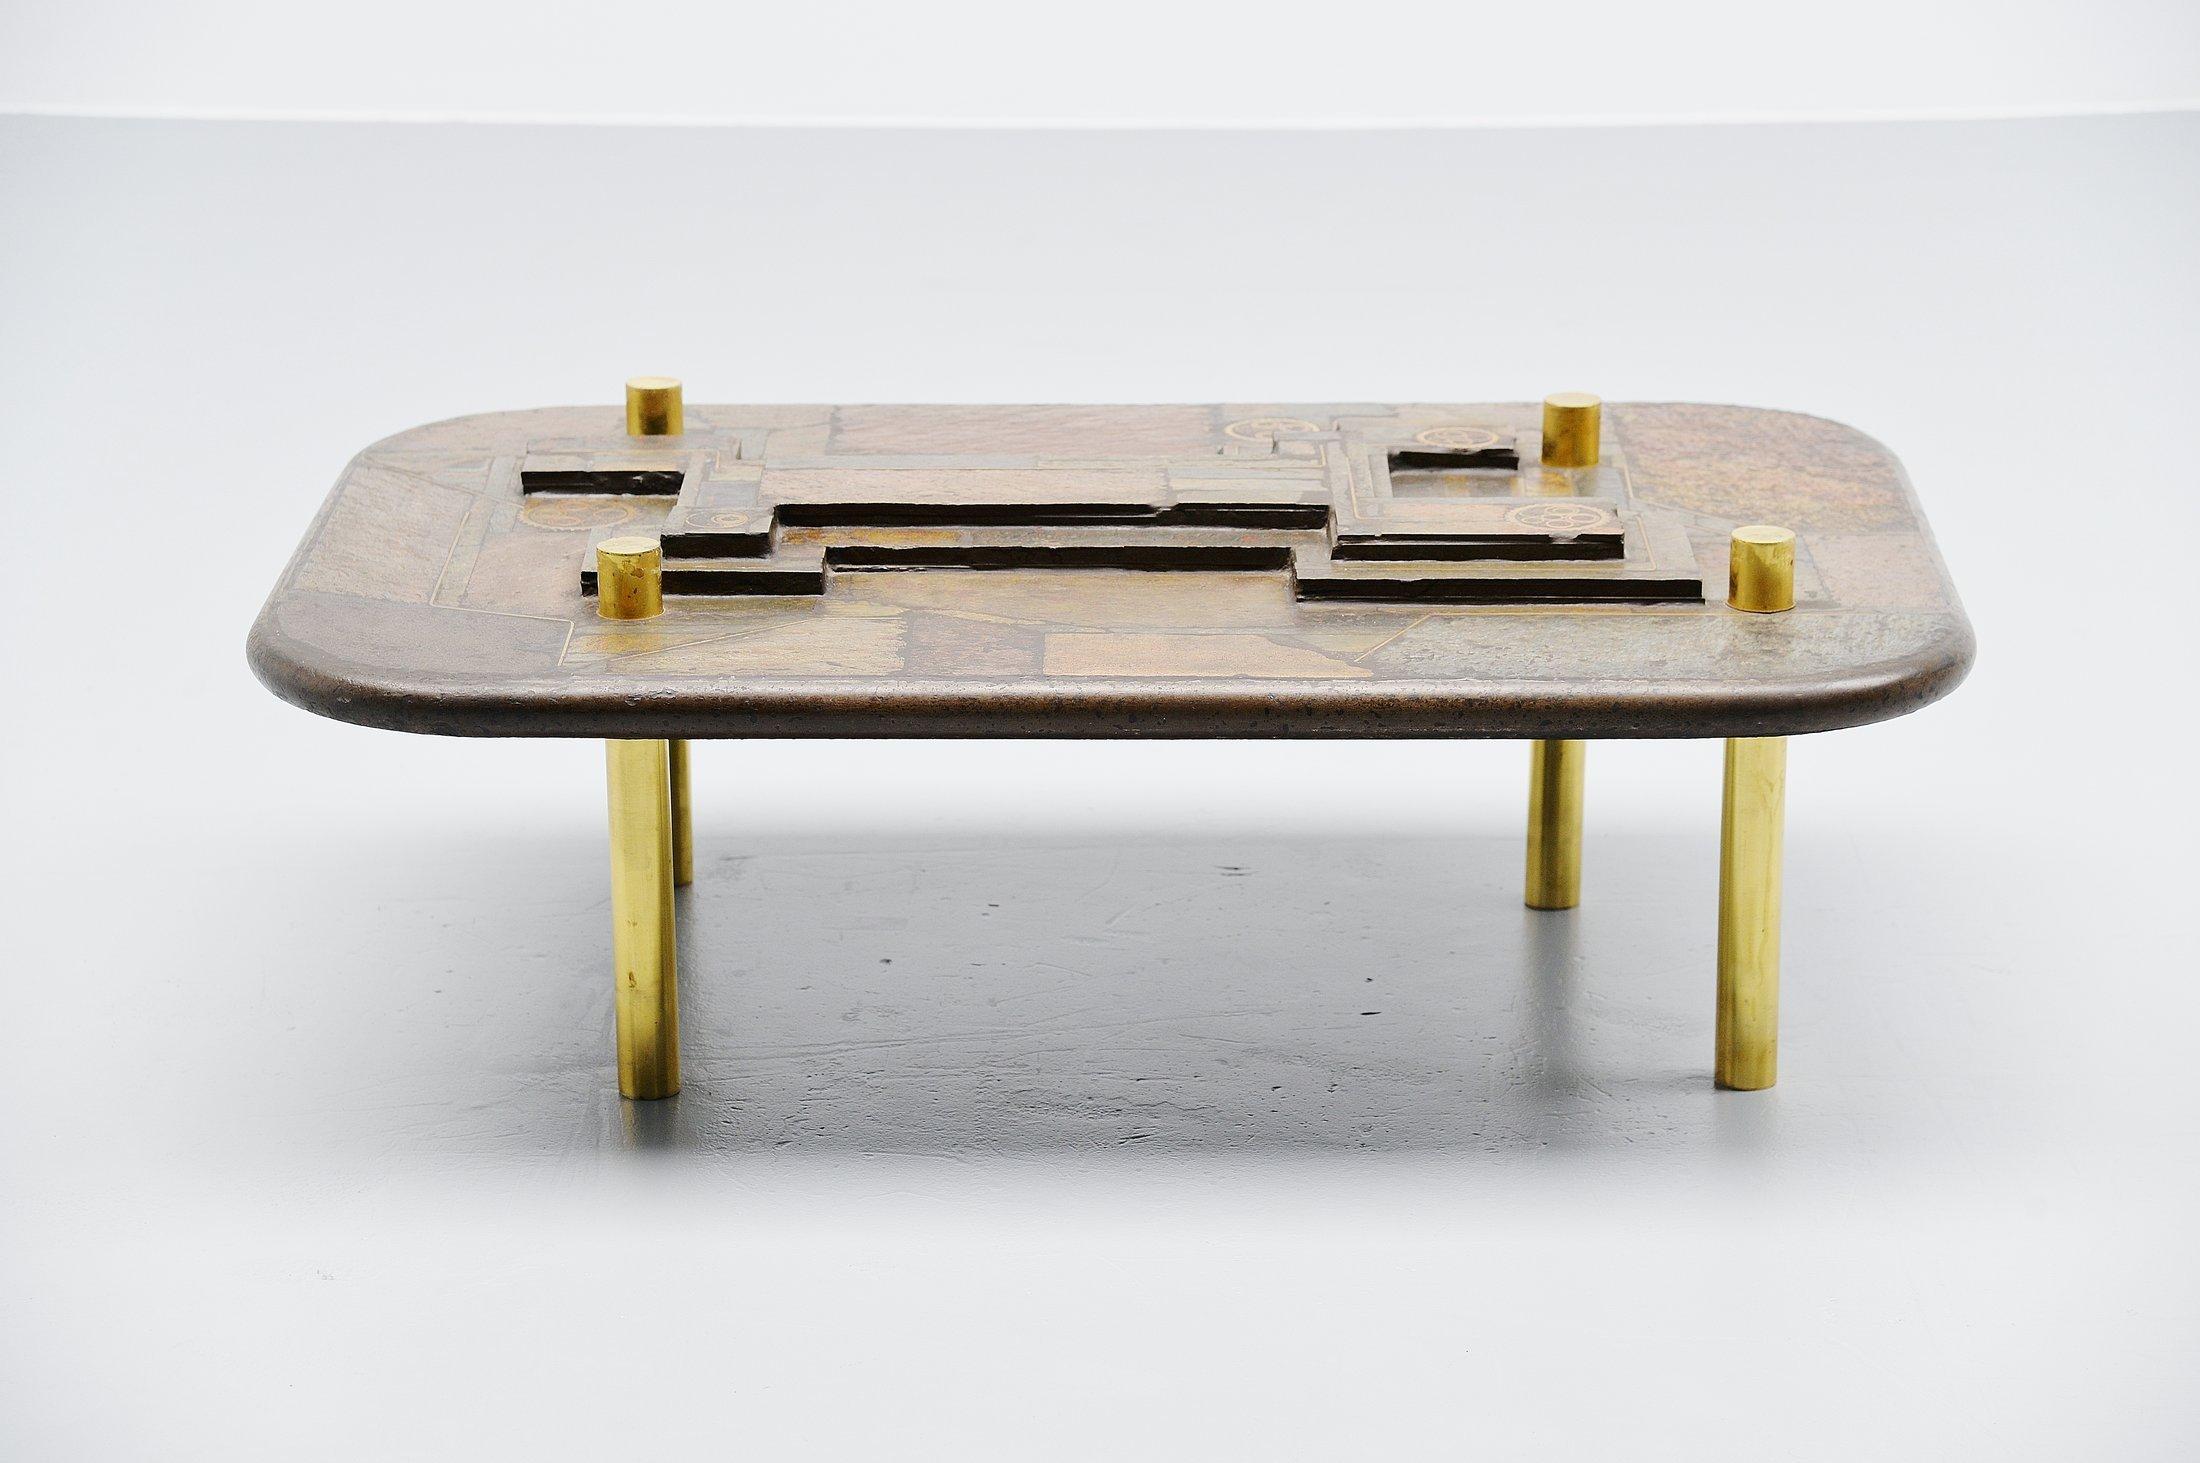 Very nice one off unusual shaped coffee table designed and made by Marcus Kingma, Holland 1993. Marcus was the brother of Paul Kingma who started making these tables in the 1960s. Marcus helped Paul making table at the end of his career and